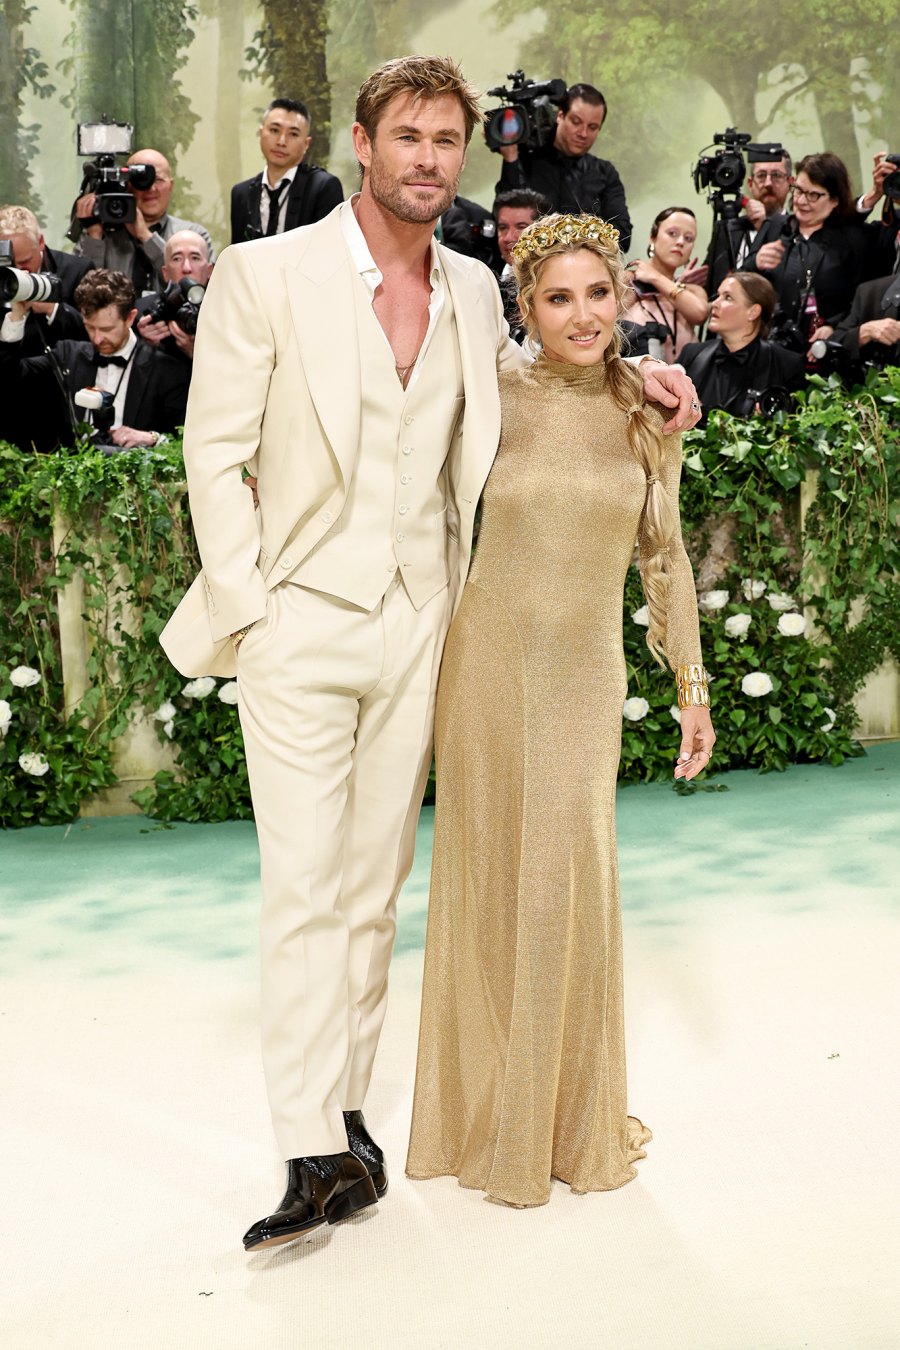 Chris Hemsworth and Elsa Pataky’s Whirlwind Romance: A Complete Timeline of Their Relationship